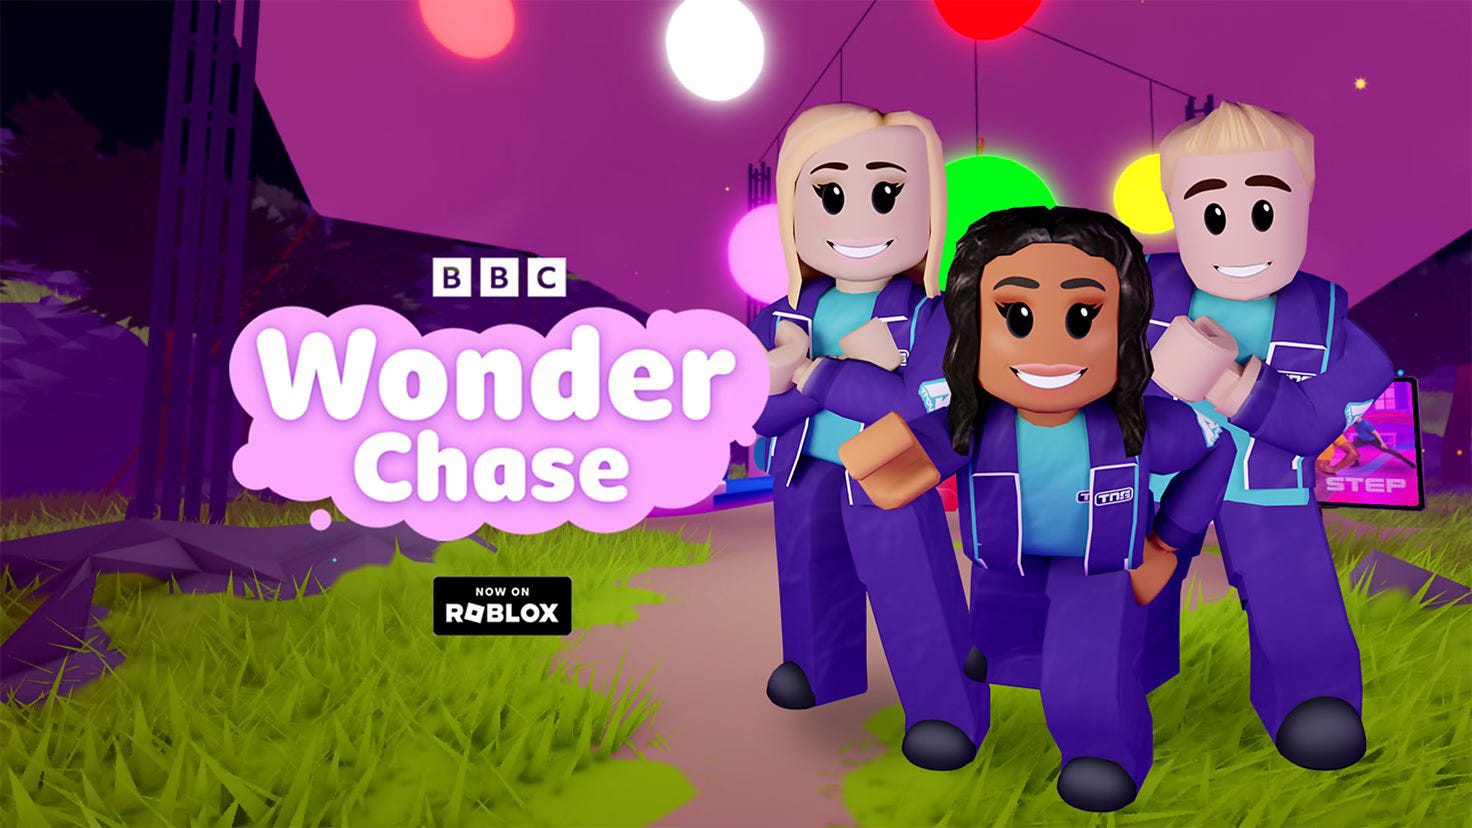 BBC Wonder Chase Brings BBC Shows, Personalities to Roblox